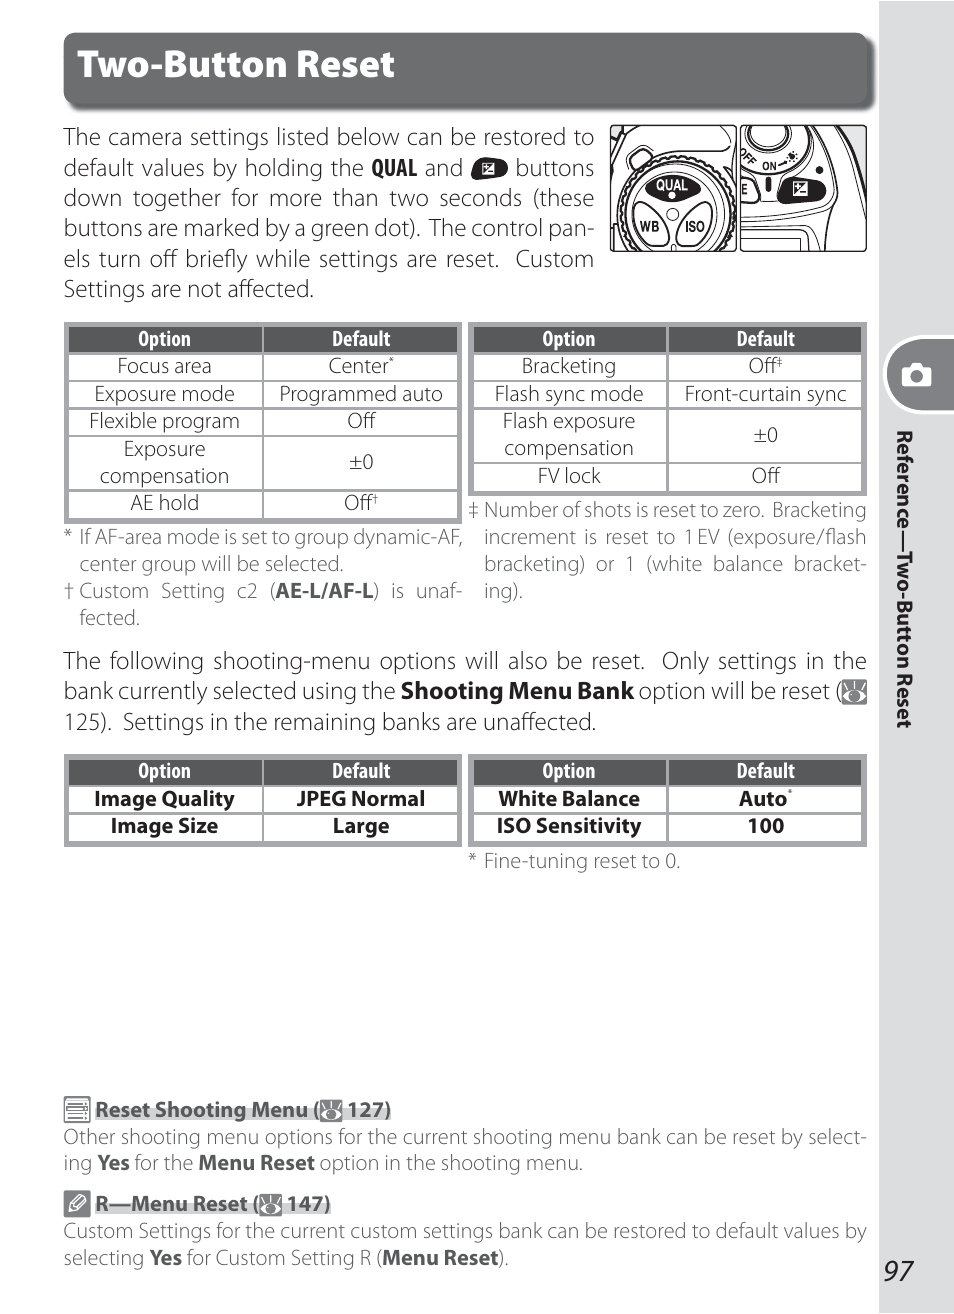 Two-button reset | Nikon D200 User Manual | Page 107 / 221